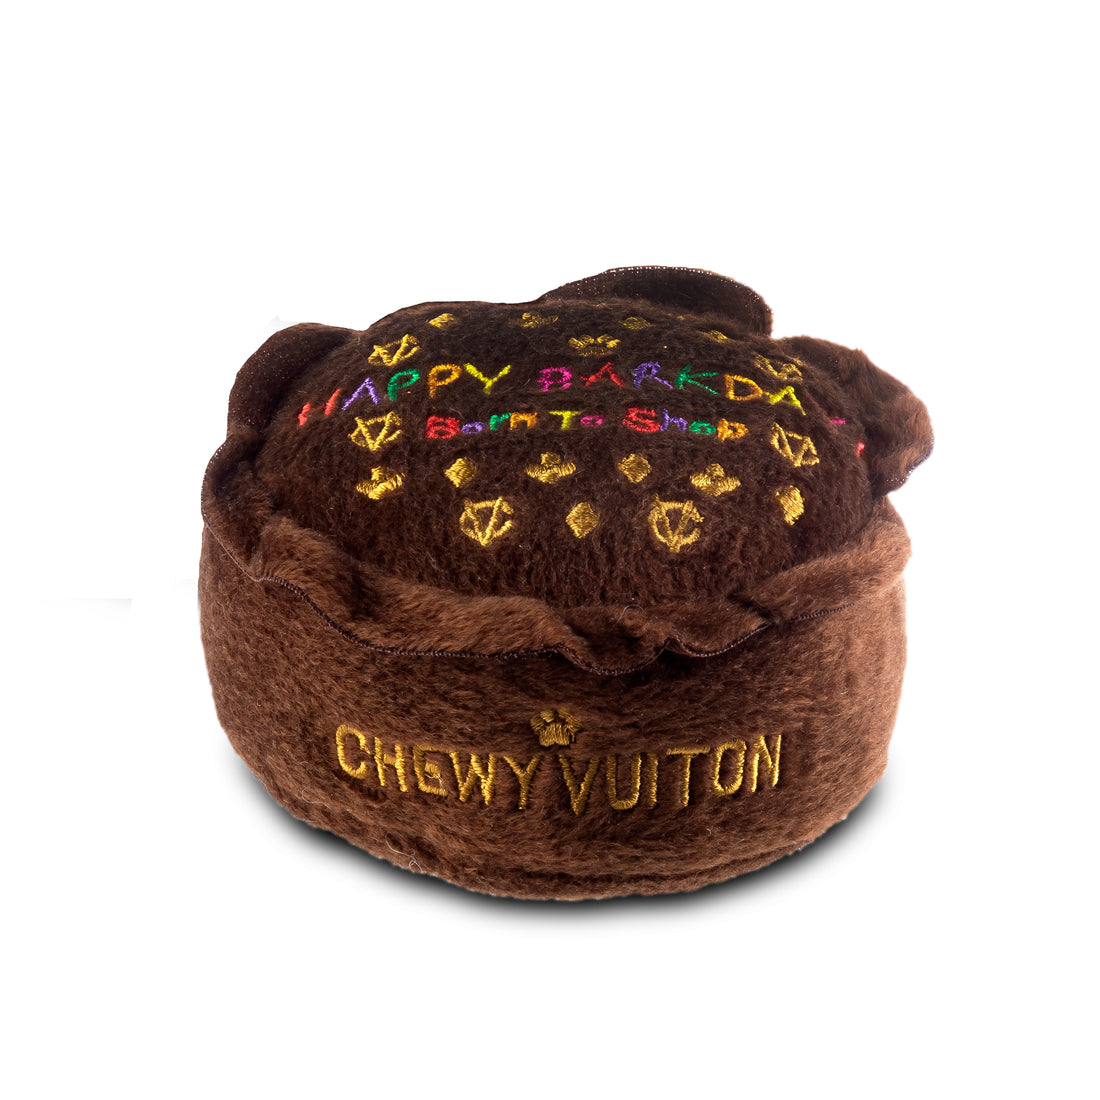 Chewy Vuiton Barkday Cake